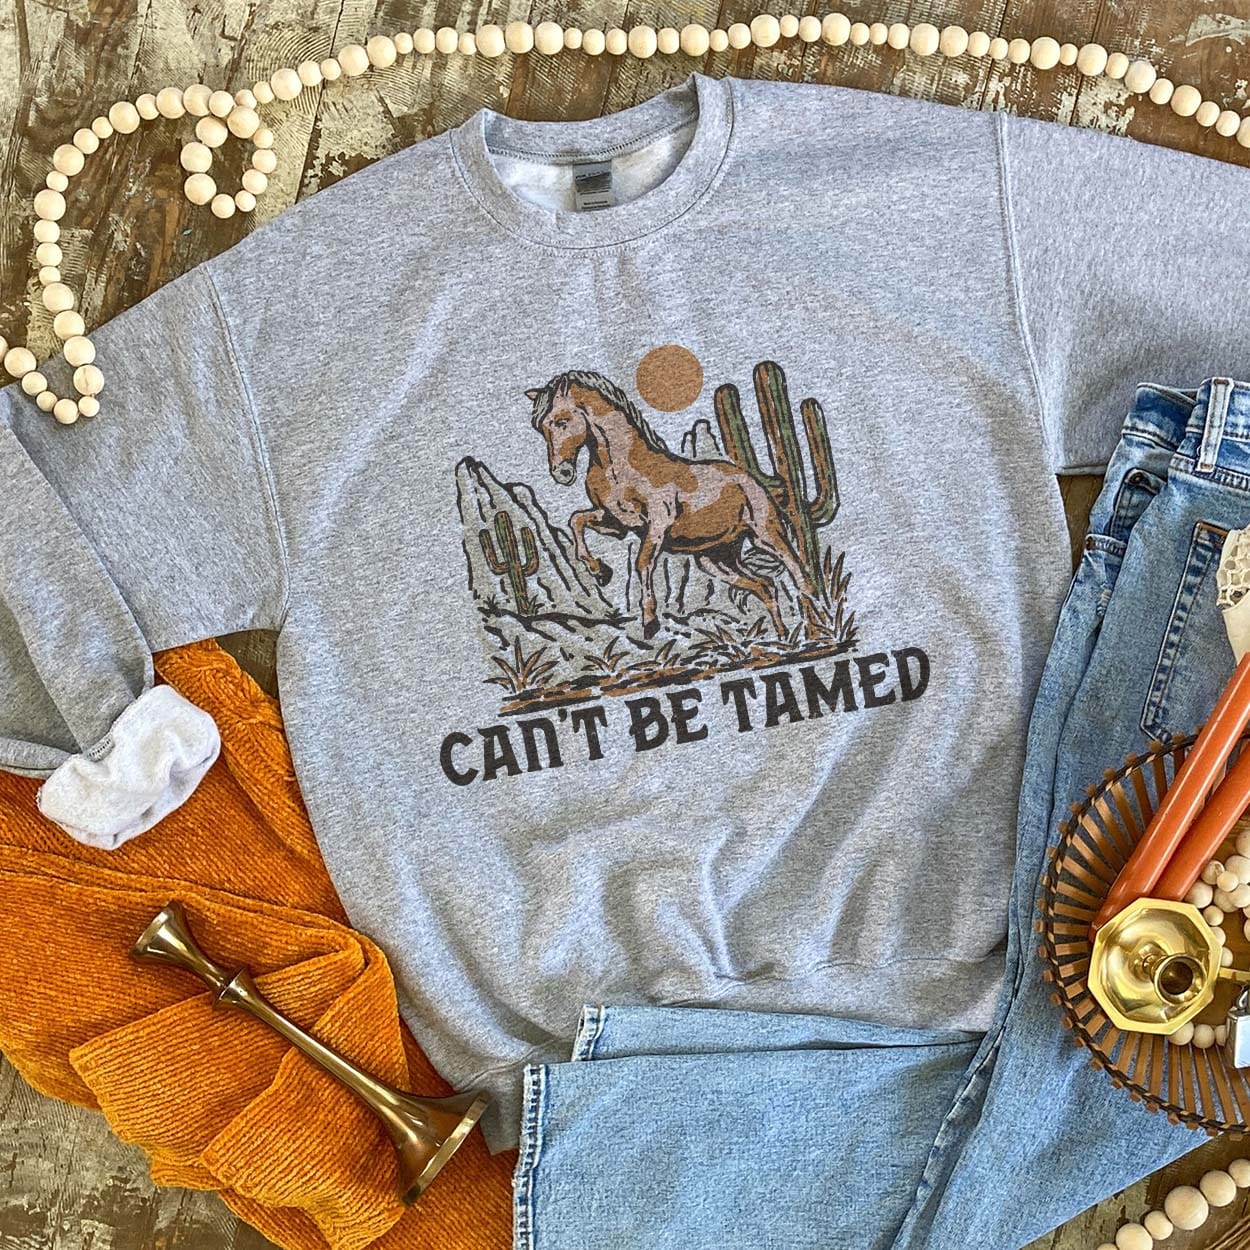 Can't Be Tamed Sweatshirt - boot, boots, cactus, cowboy hat, cowgirl, cowgirl hat, desert, free, horseshoe, horseshoes, southwestern, sweat shirt, sweater, sweatshir, sweatshirt, western, white, white sweatshirt, wild -  - Baha Ranch Western Wear